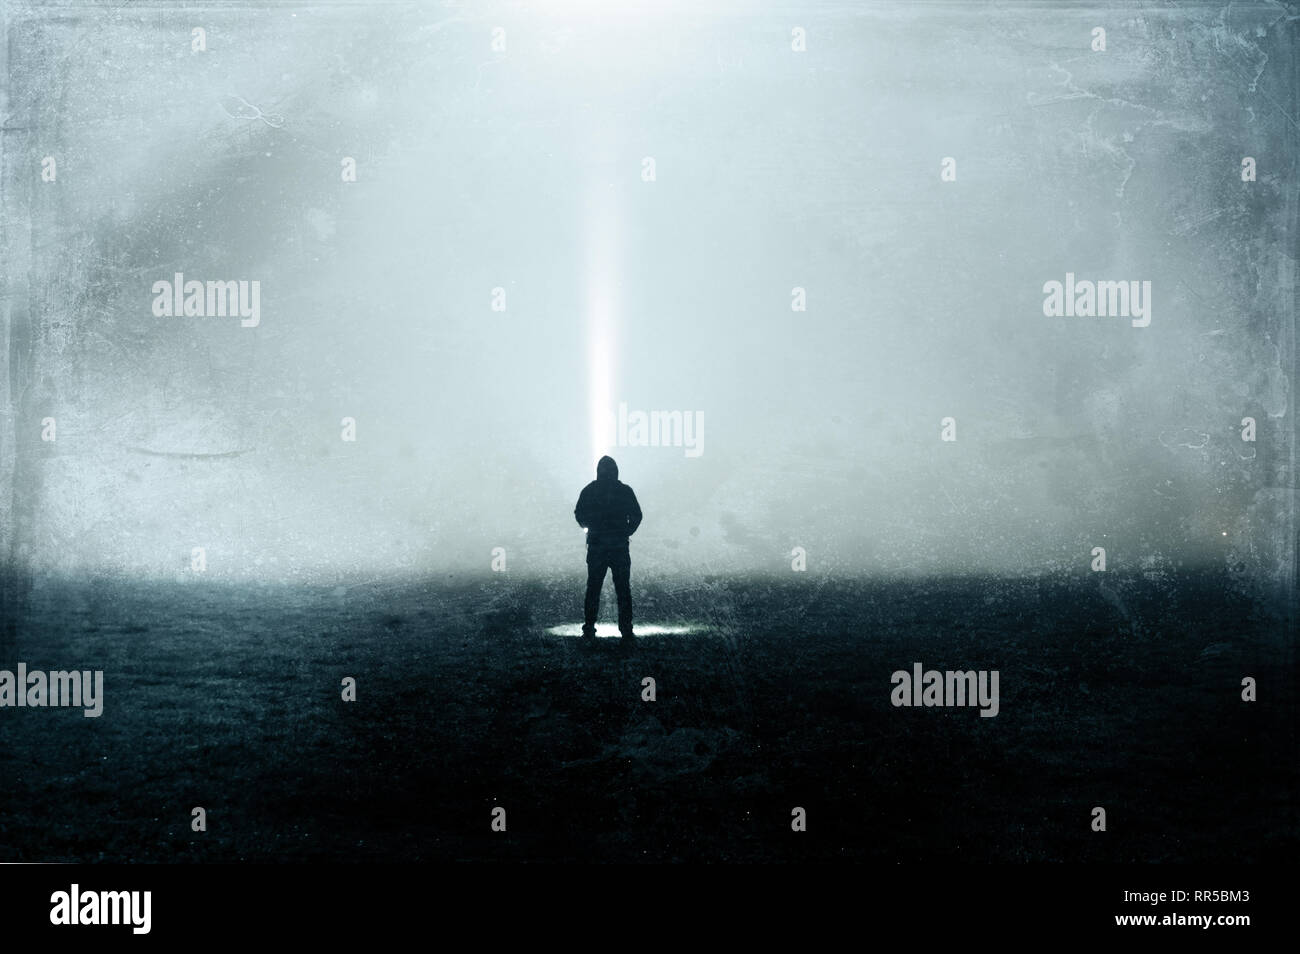 An eerie silhouette of a lone hooded figure in a field with a torch. With a dark, spooky blurred abstract, grunge effect edit. Stock Photo